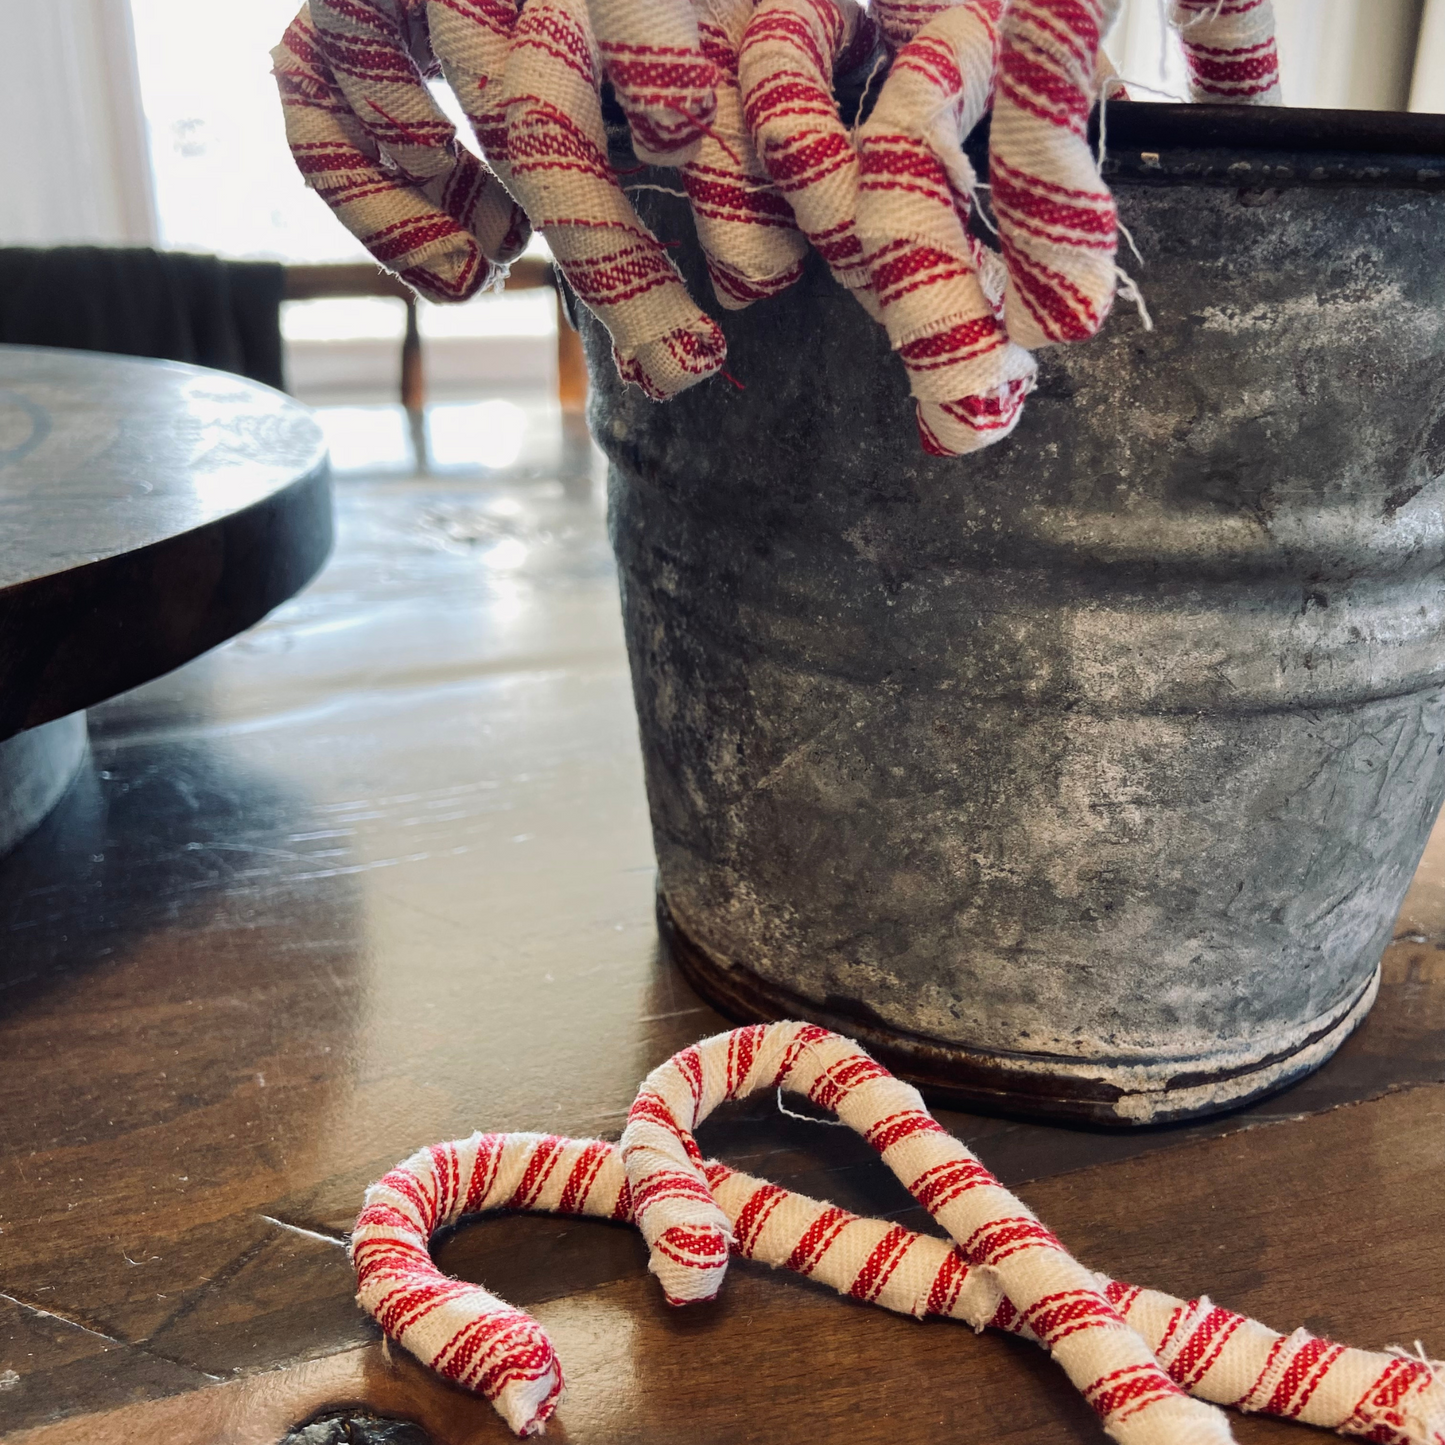 Fabric Wrapped Candy Canes in Red Striped Ticking